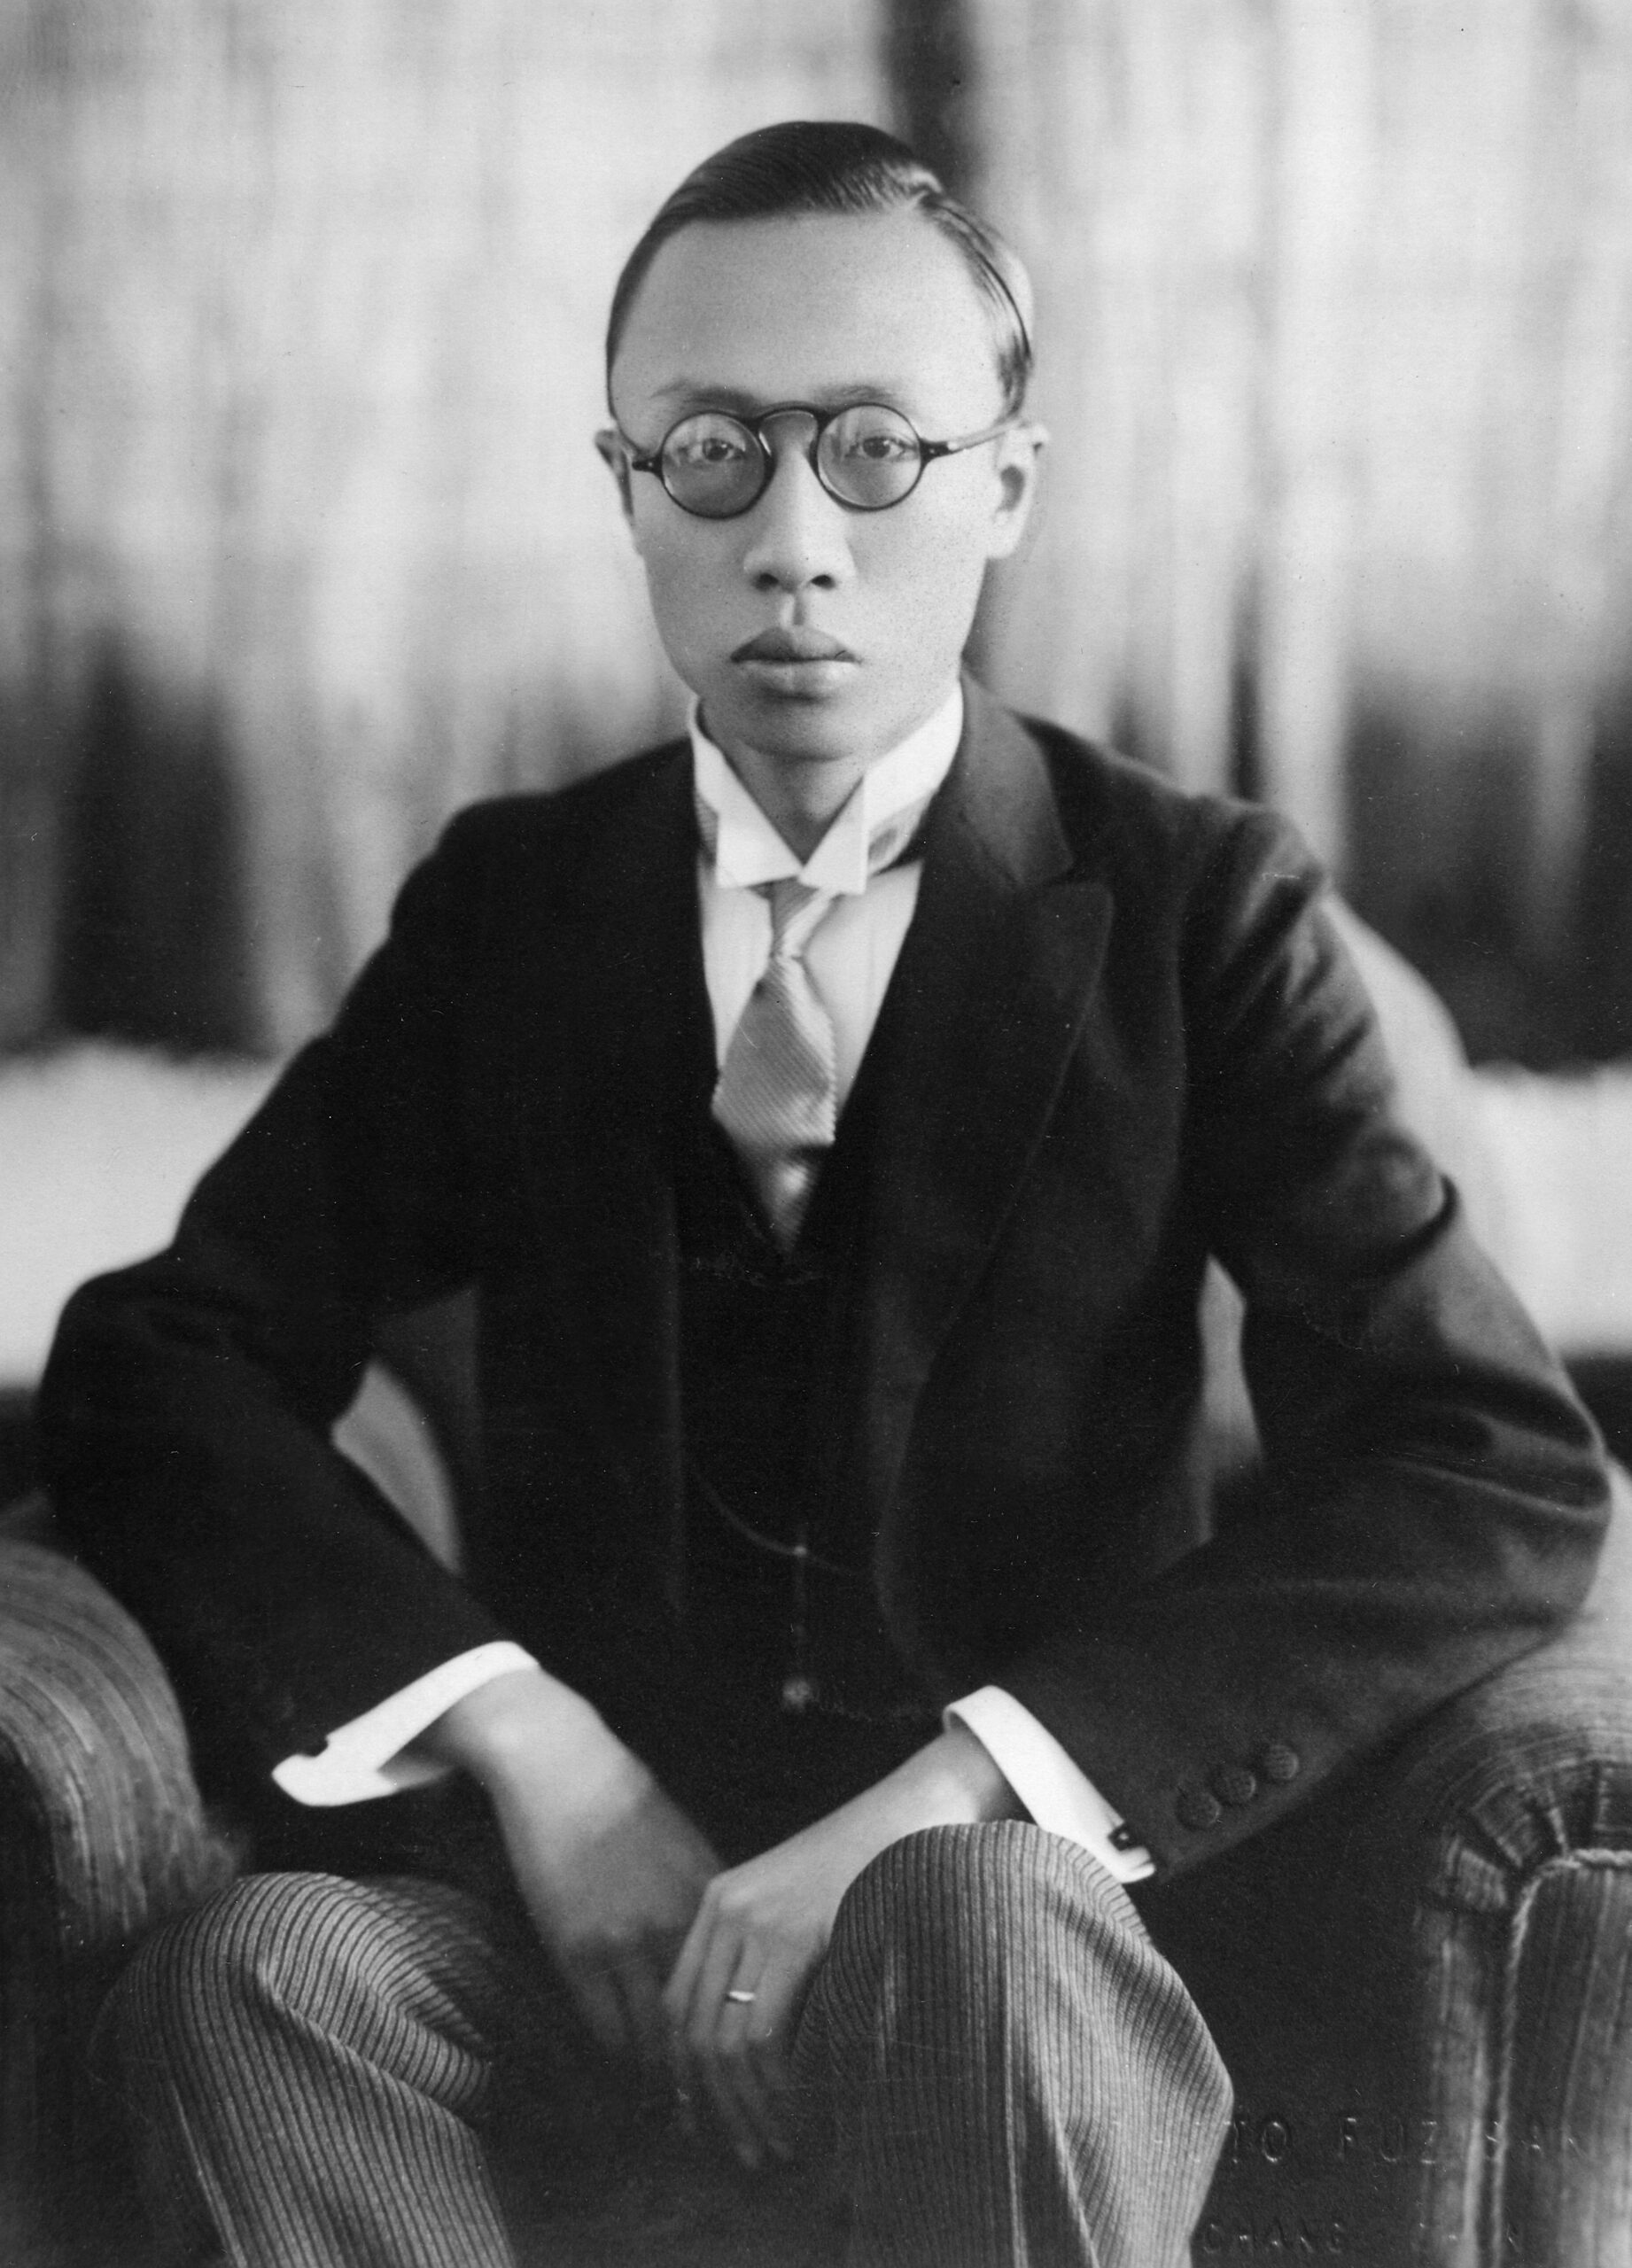 Aisin gioro puyi 1906 1967 photo by ullstein bild via getty images scaled